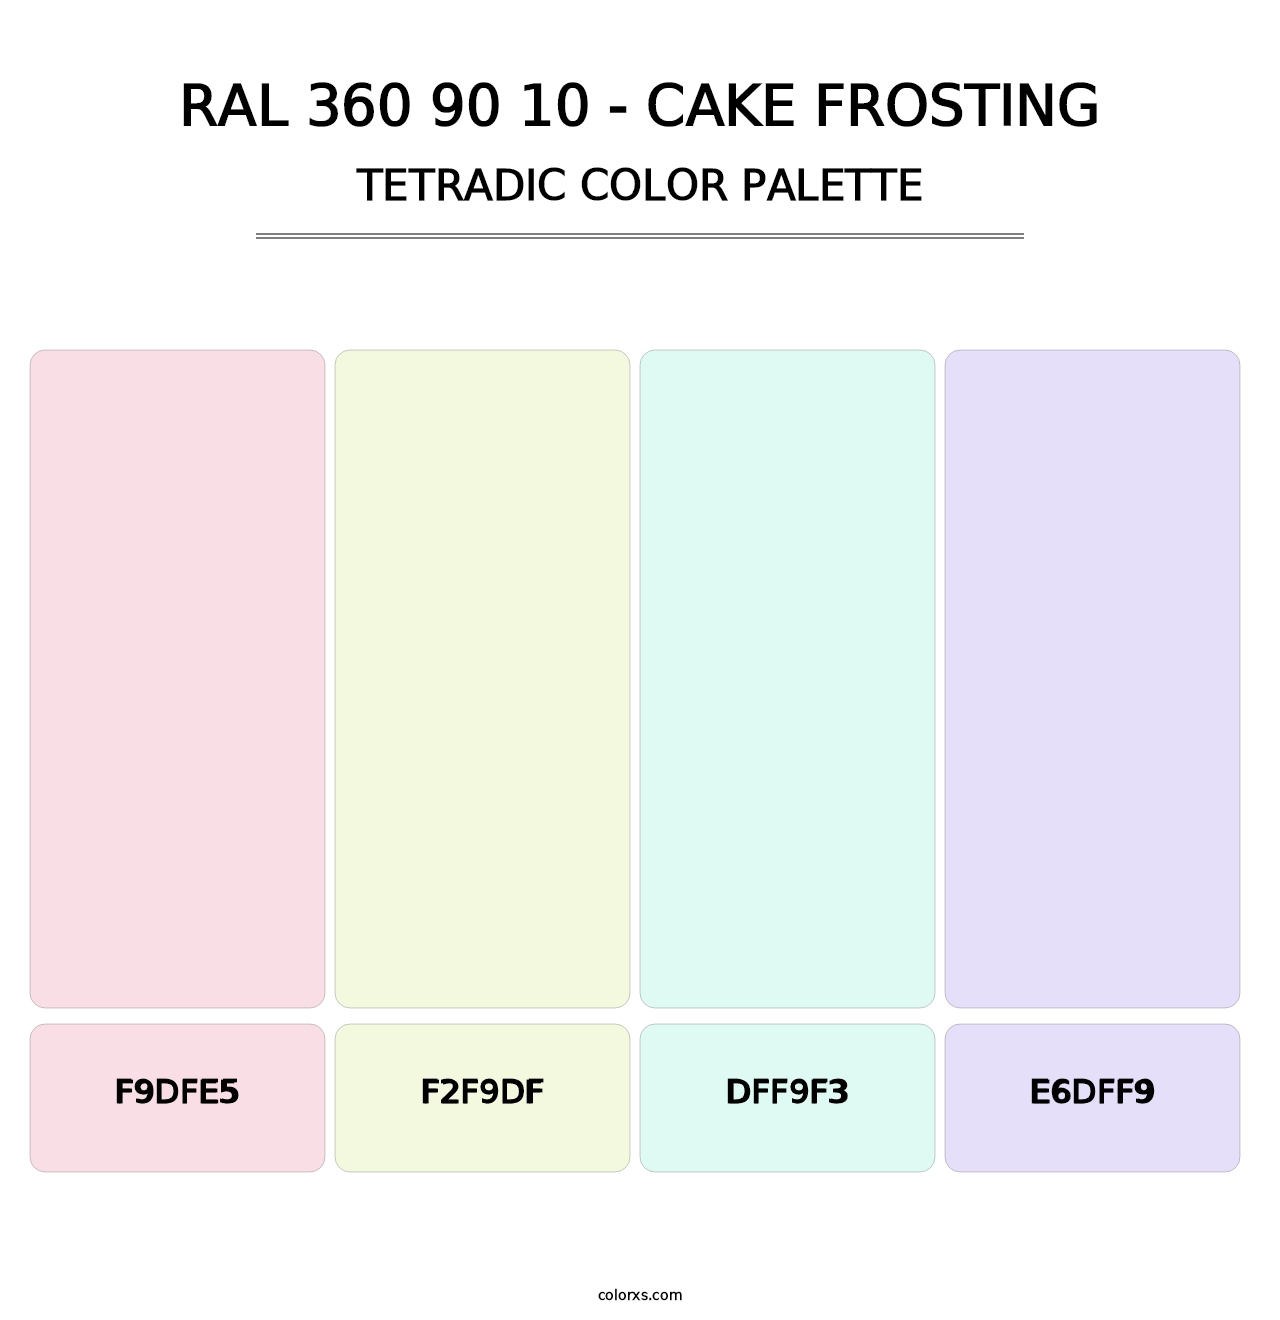 RAL 360 90 10 - Cake Frosting - Tetradic Color Palette